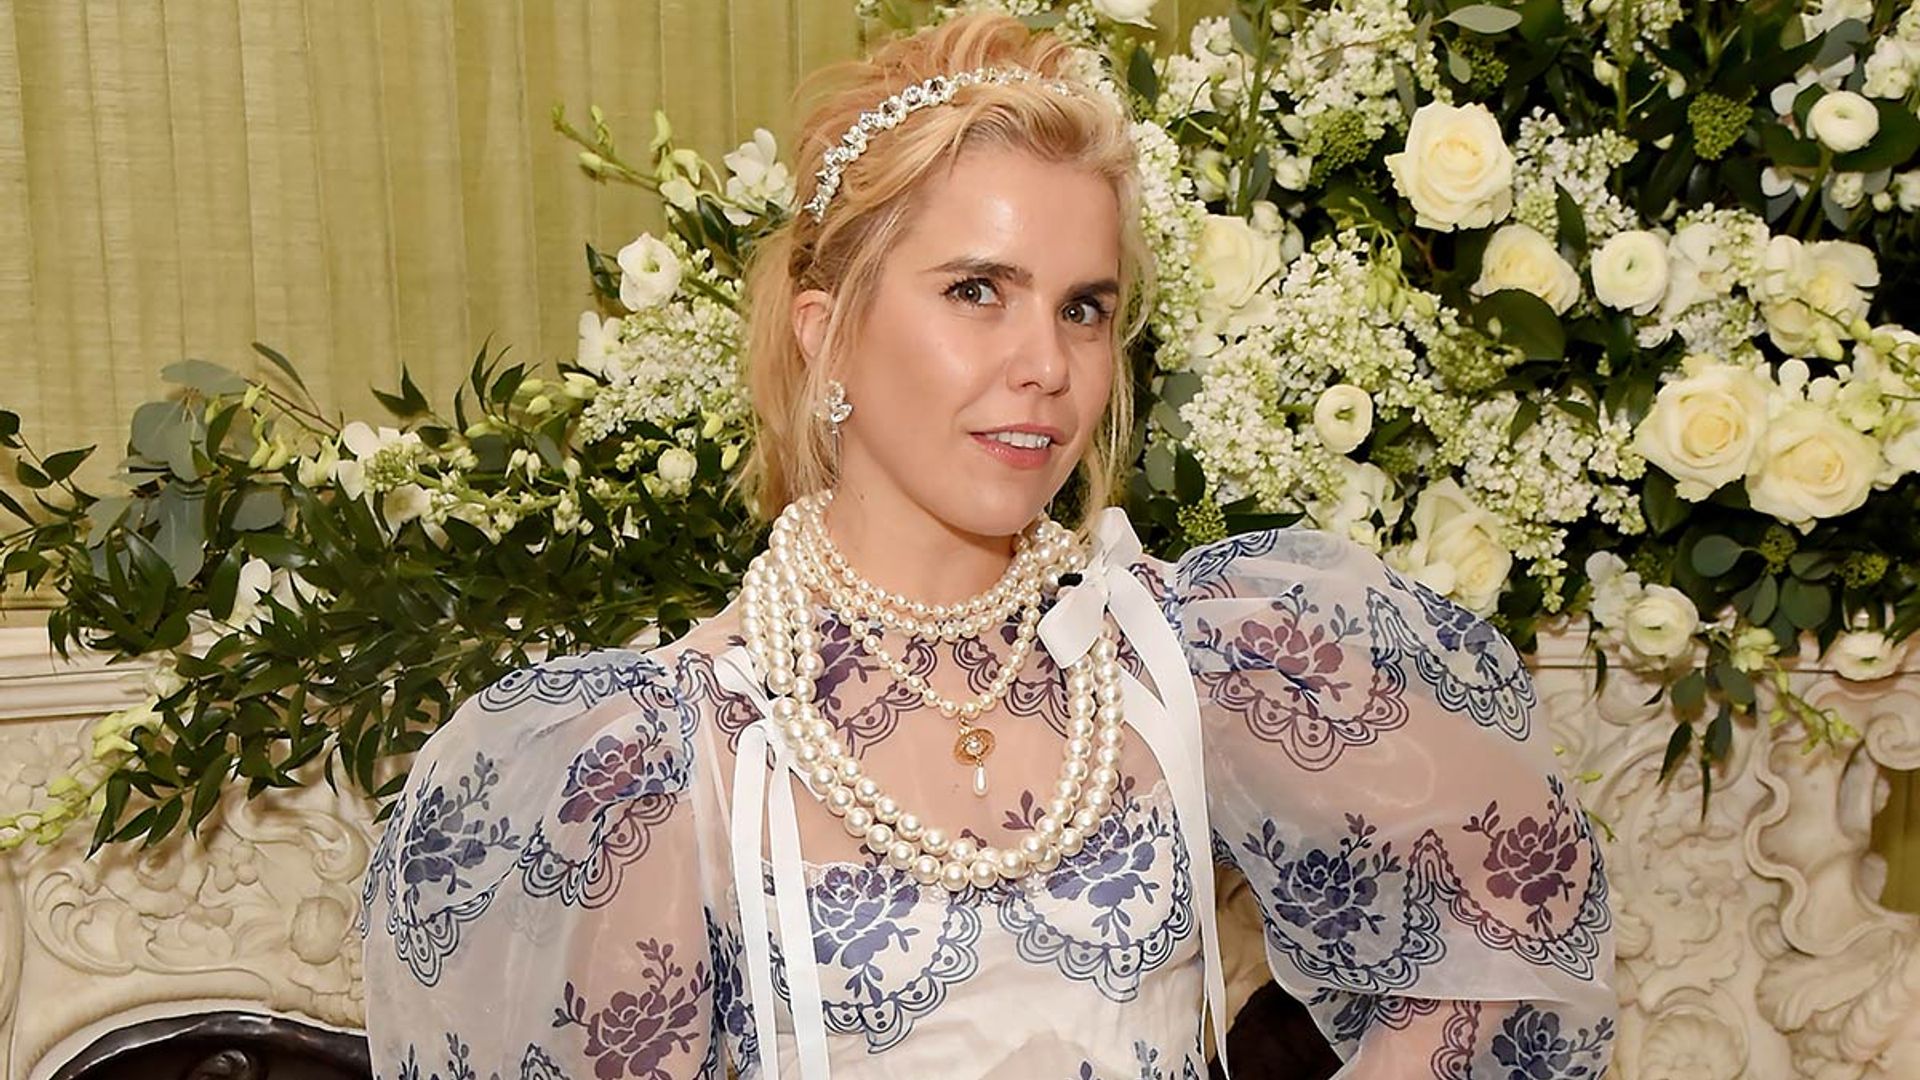 Paloma Faith opens up about her body insecurities in pregnancy – fans react